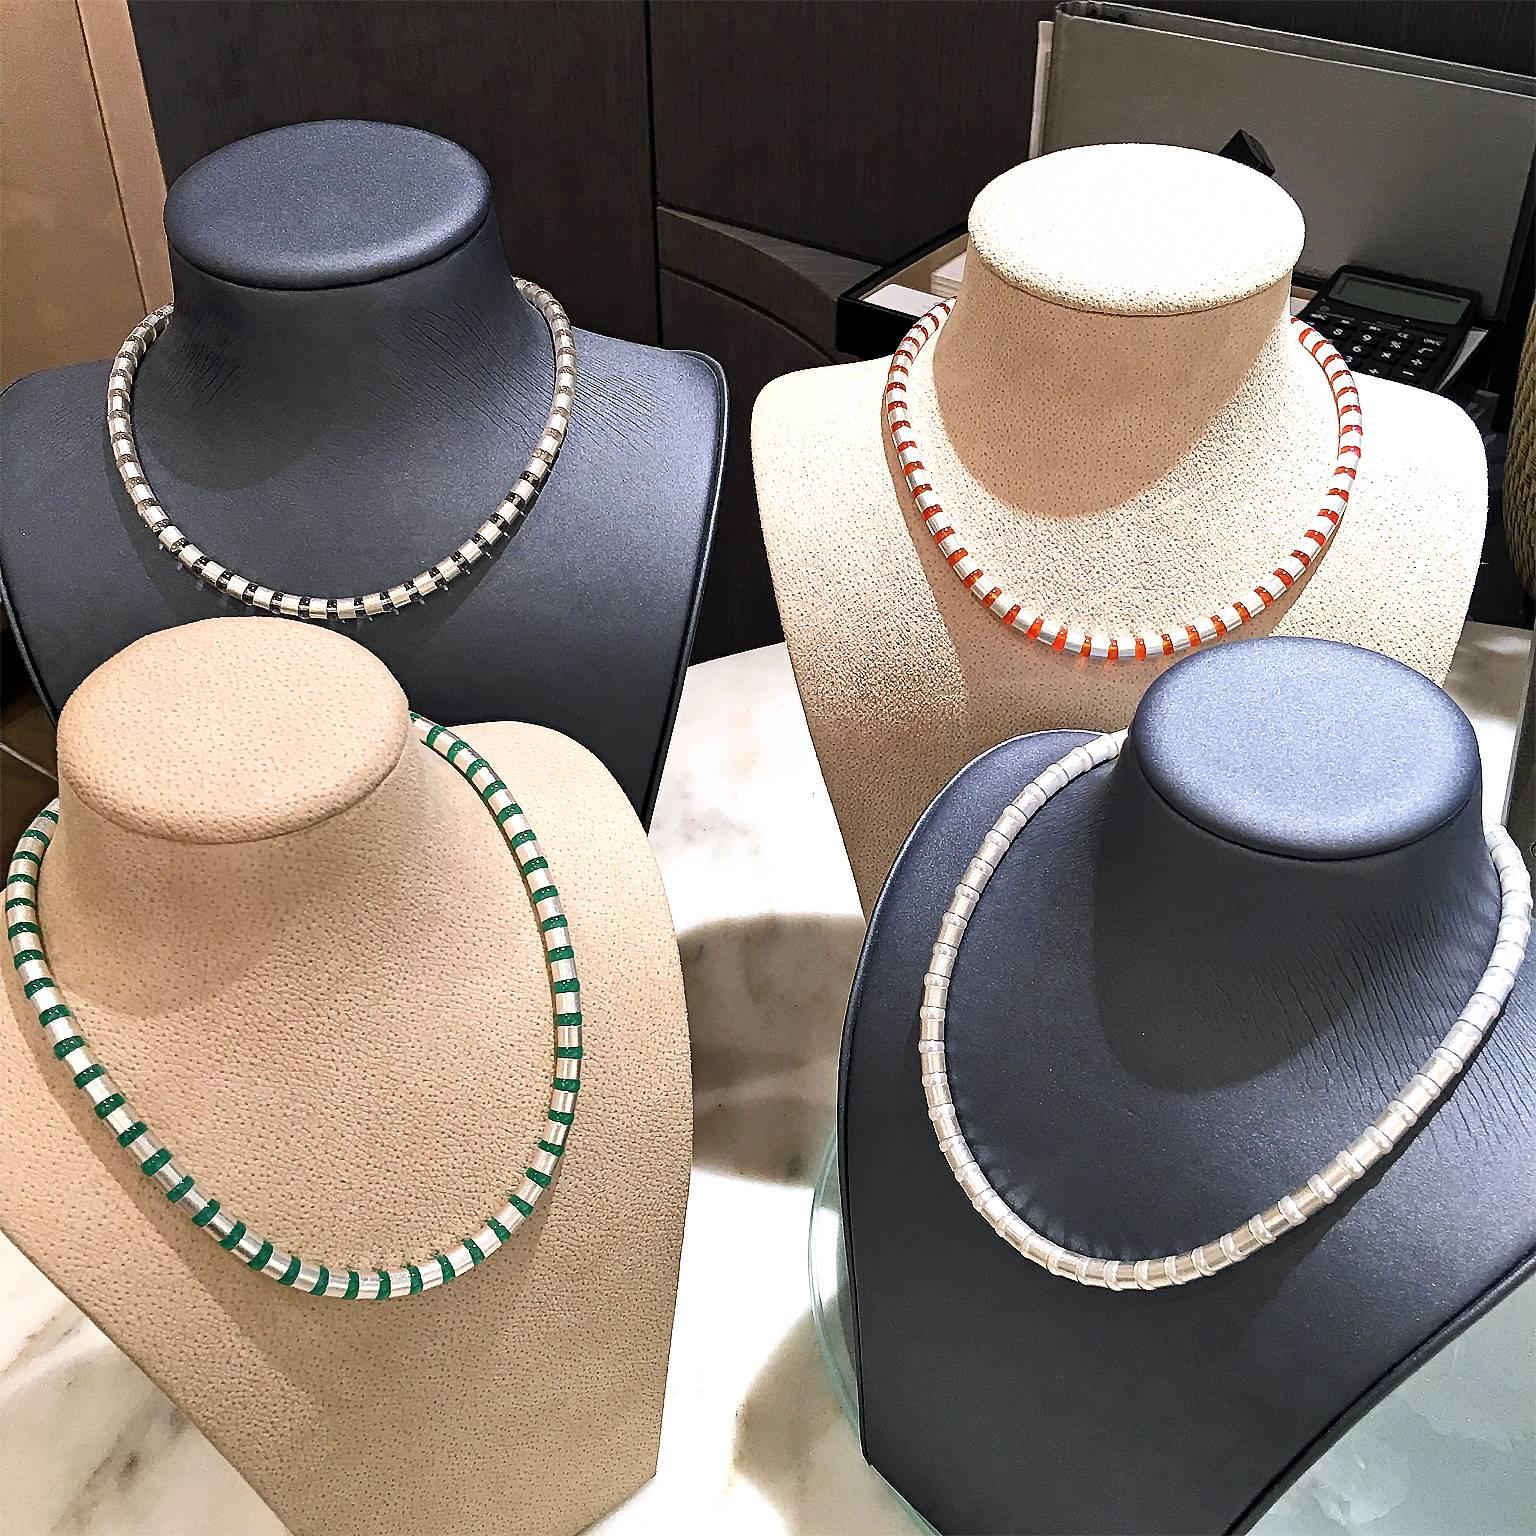 Four Cleopatra Necklaces handcrafted in Idar-Oberstein Germany by acclaimed master metalsmith and jewelry designer Erich Zimmermann. Each Necklace features dozens of individual handmade and matte-finished sterling silver cylindrical elements